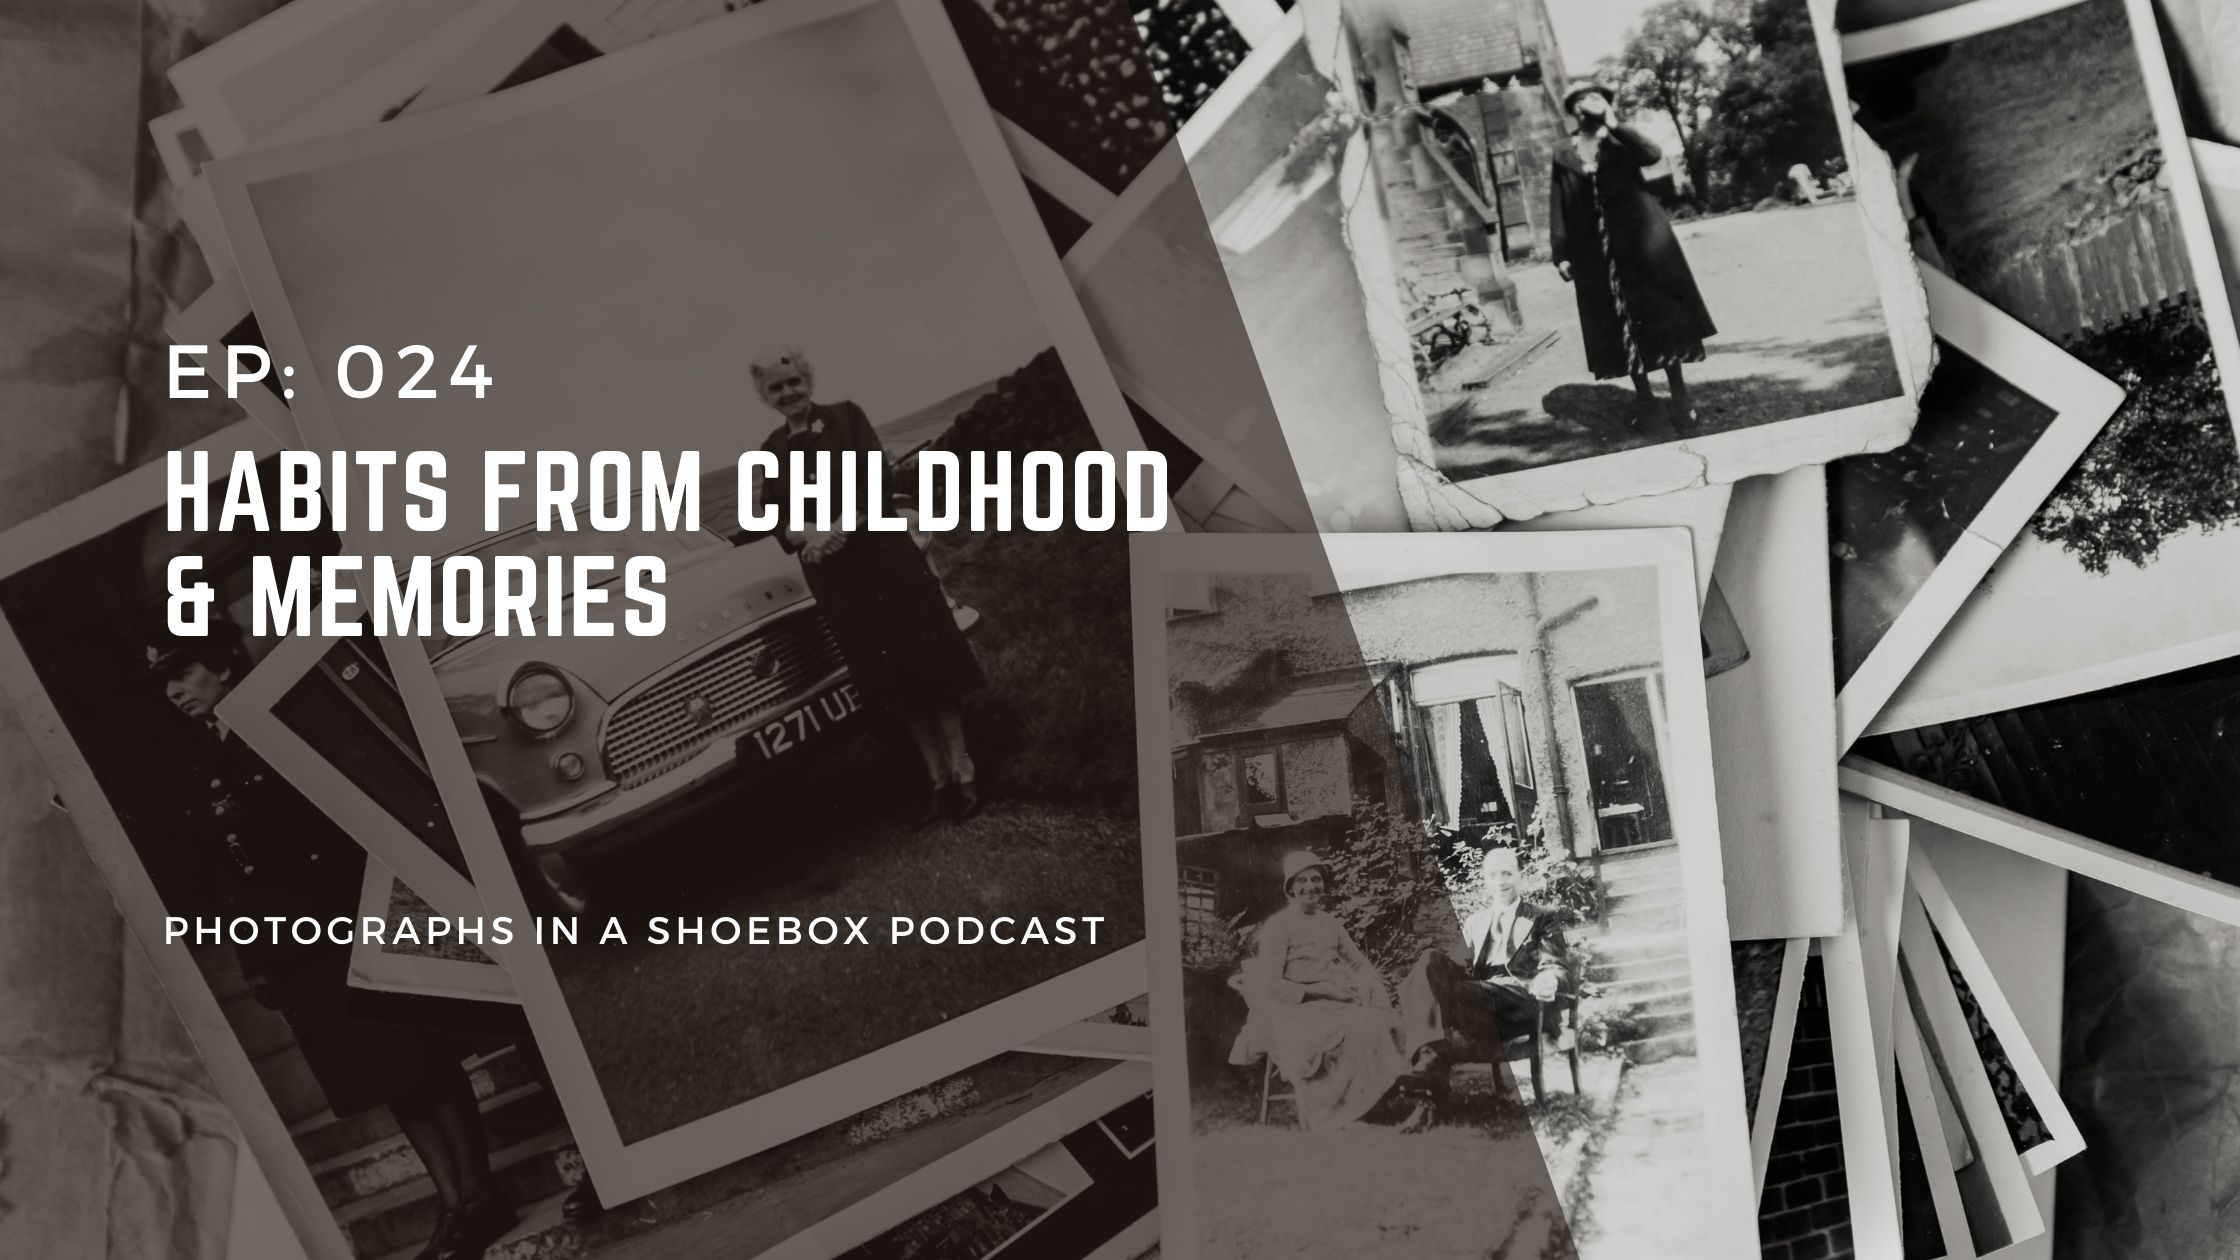 Artwork for photographs in a shoebox podcast episode 24 - habits from childhood & memories